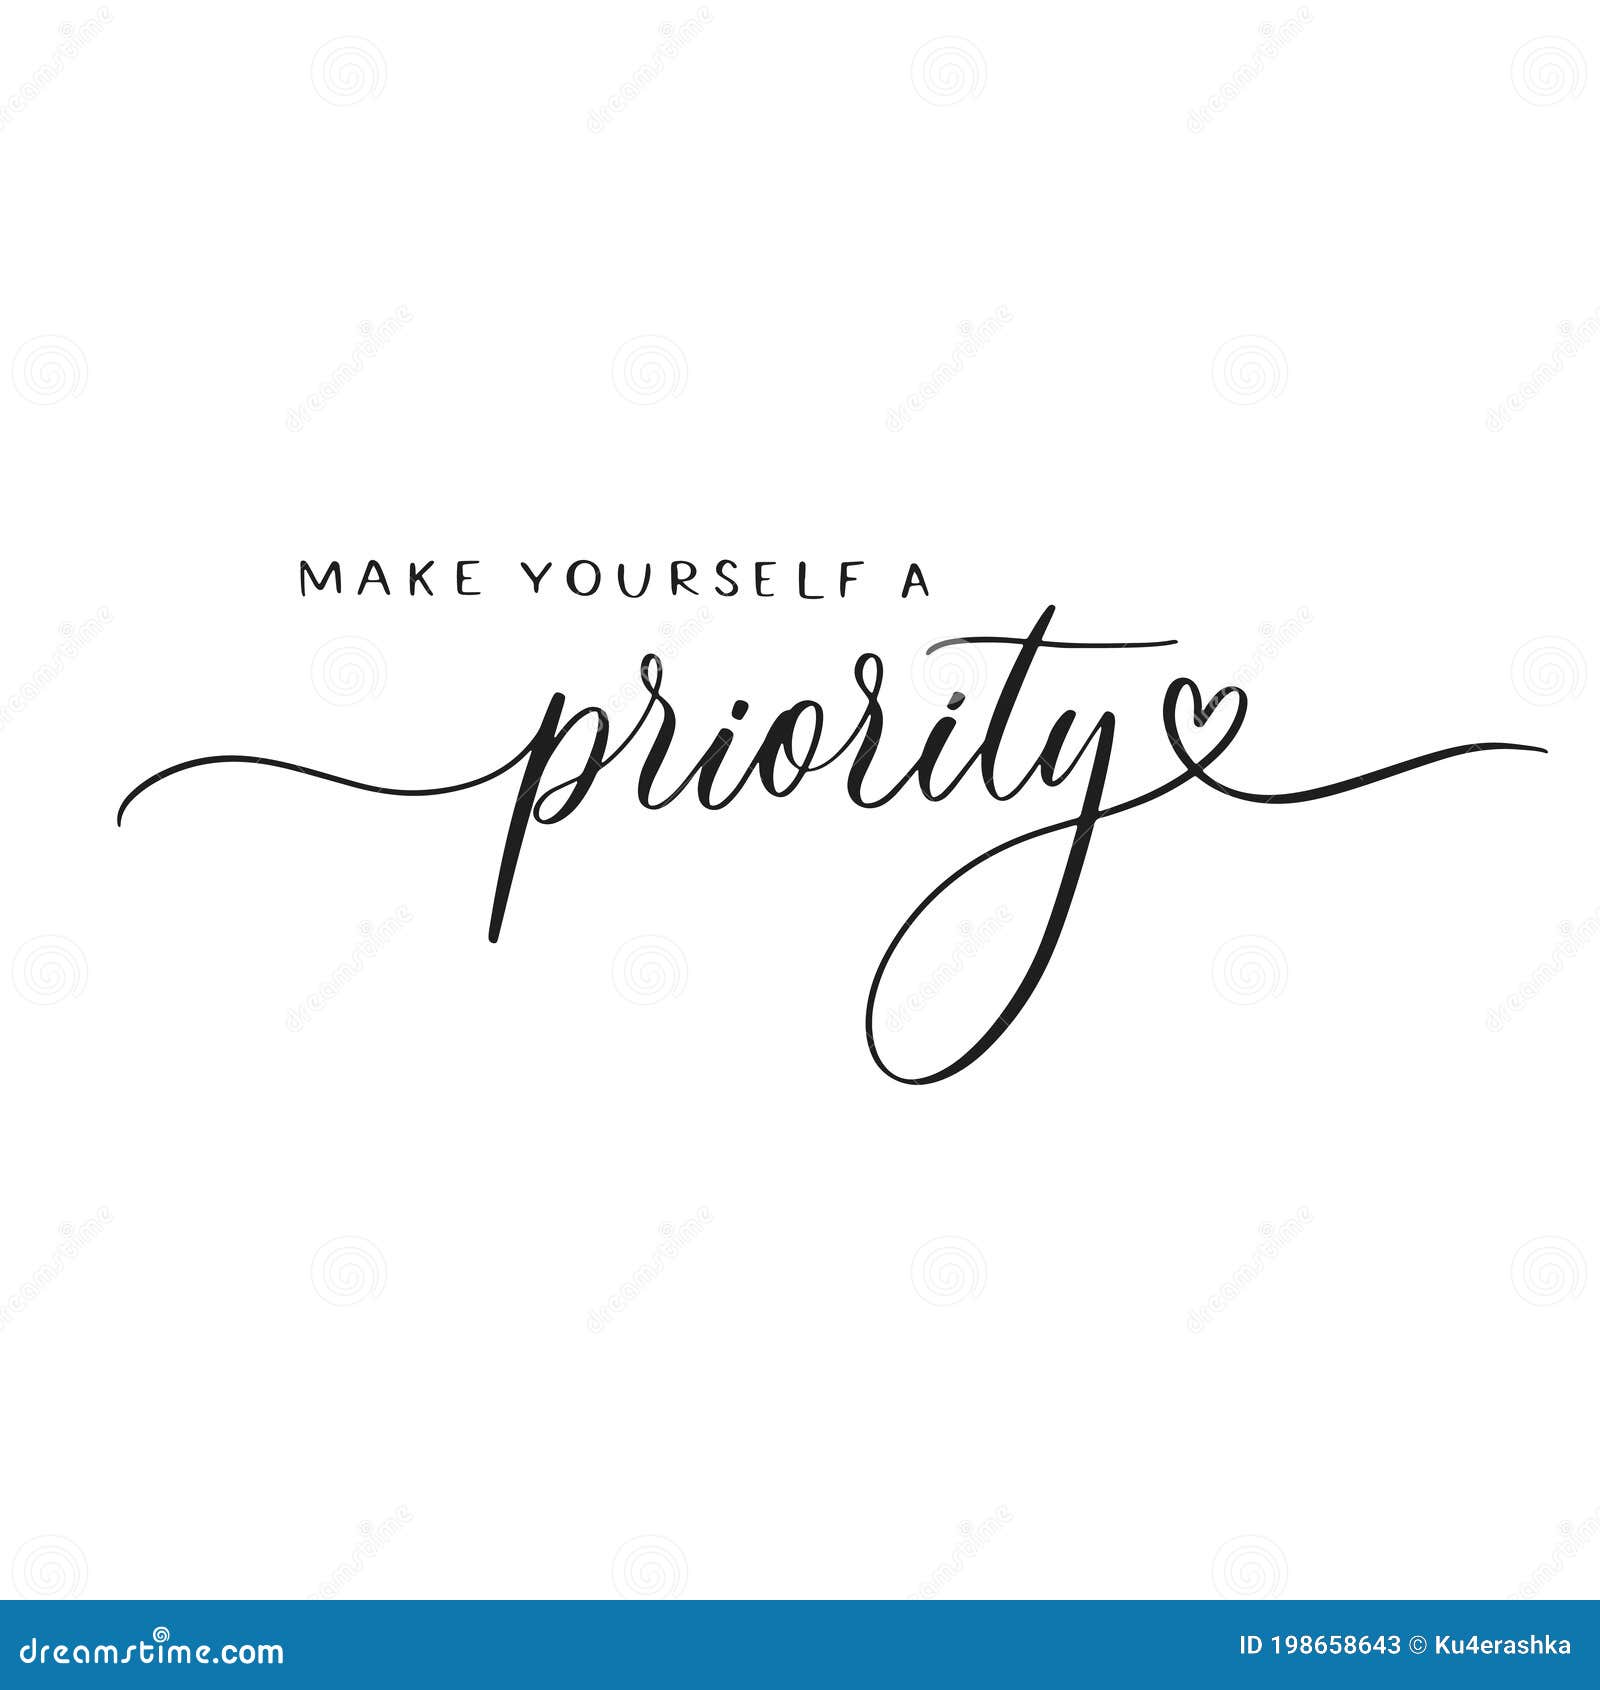 make yourself a priority - calligraphy inscription.